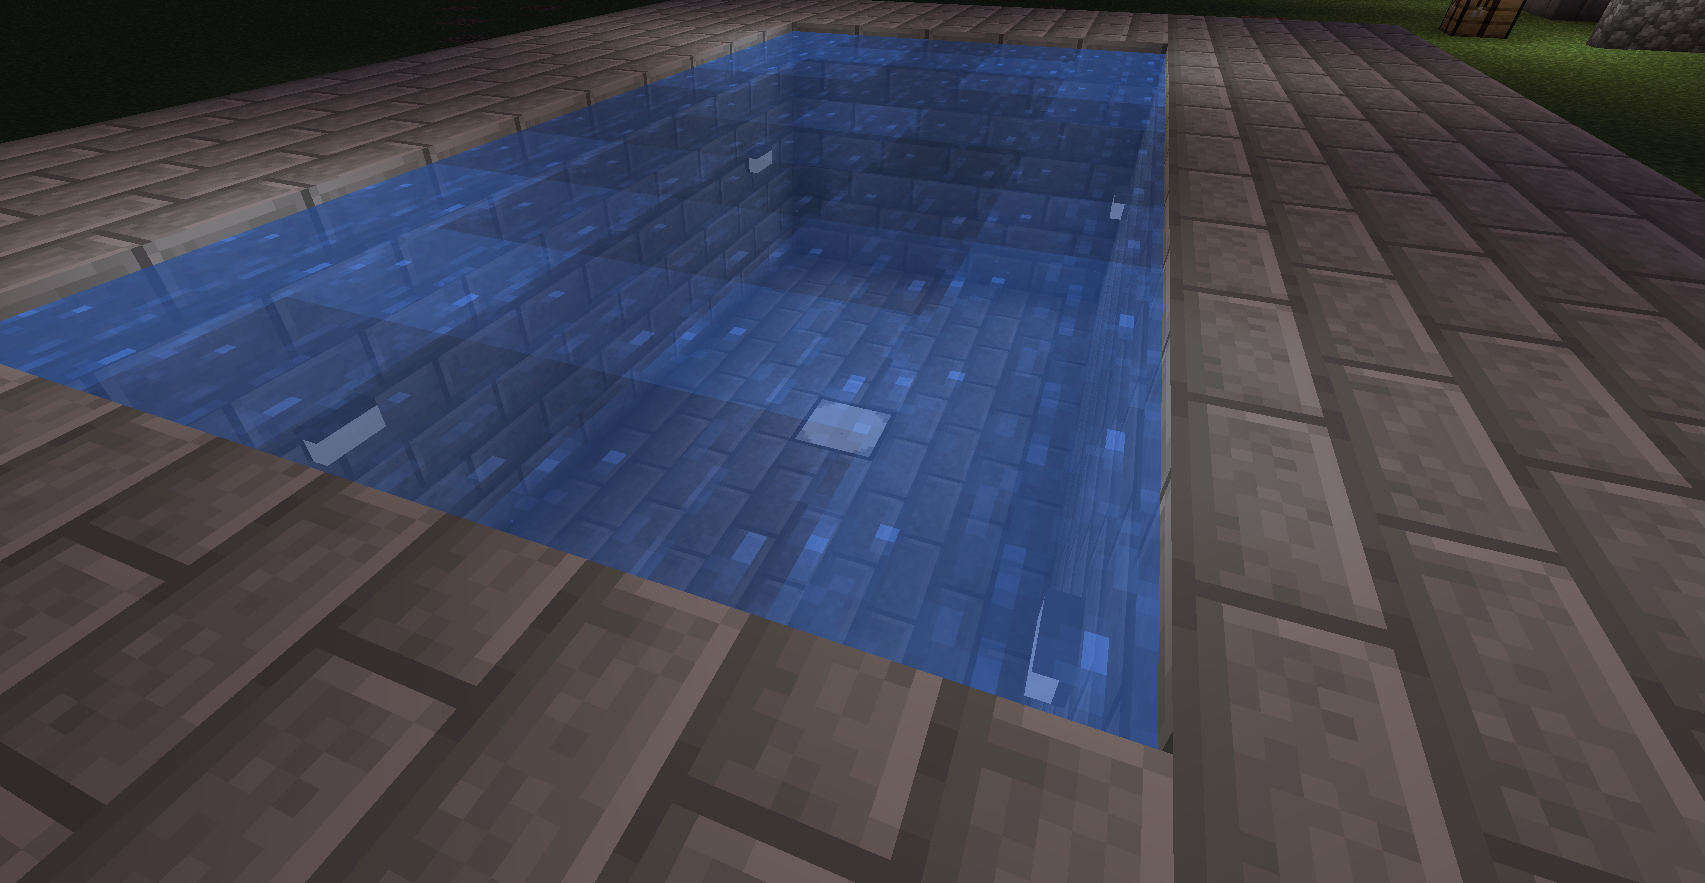 1.14 Waterlogged lamps in a pool.